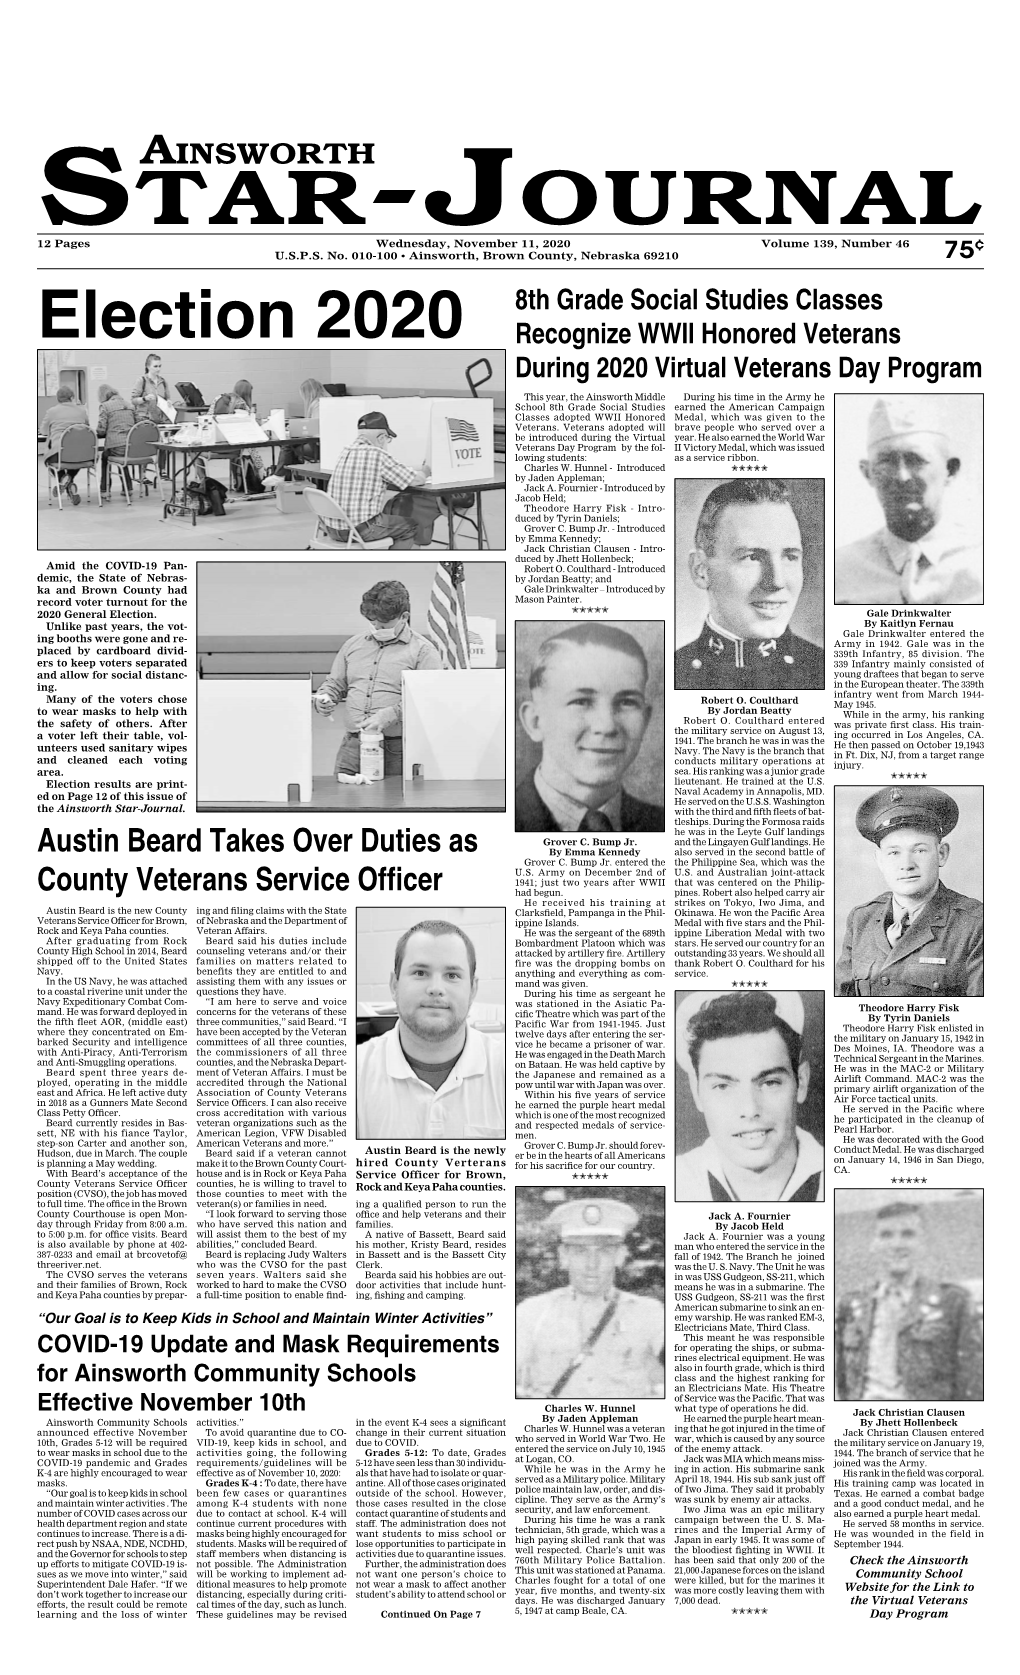 Election 2020 Recognize WWII Honored Veterans During 2020 Virtual Veterans Day Program